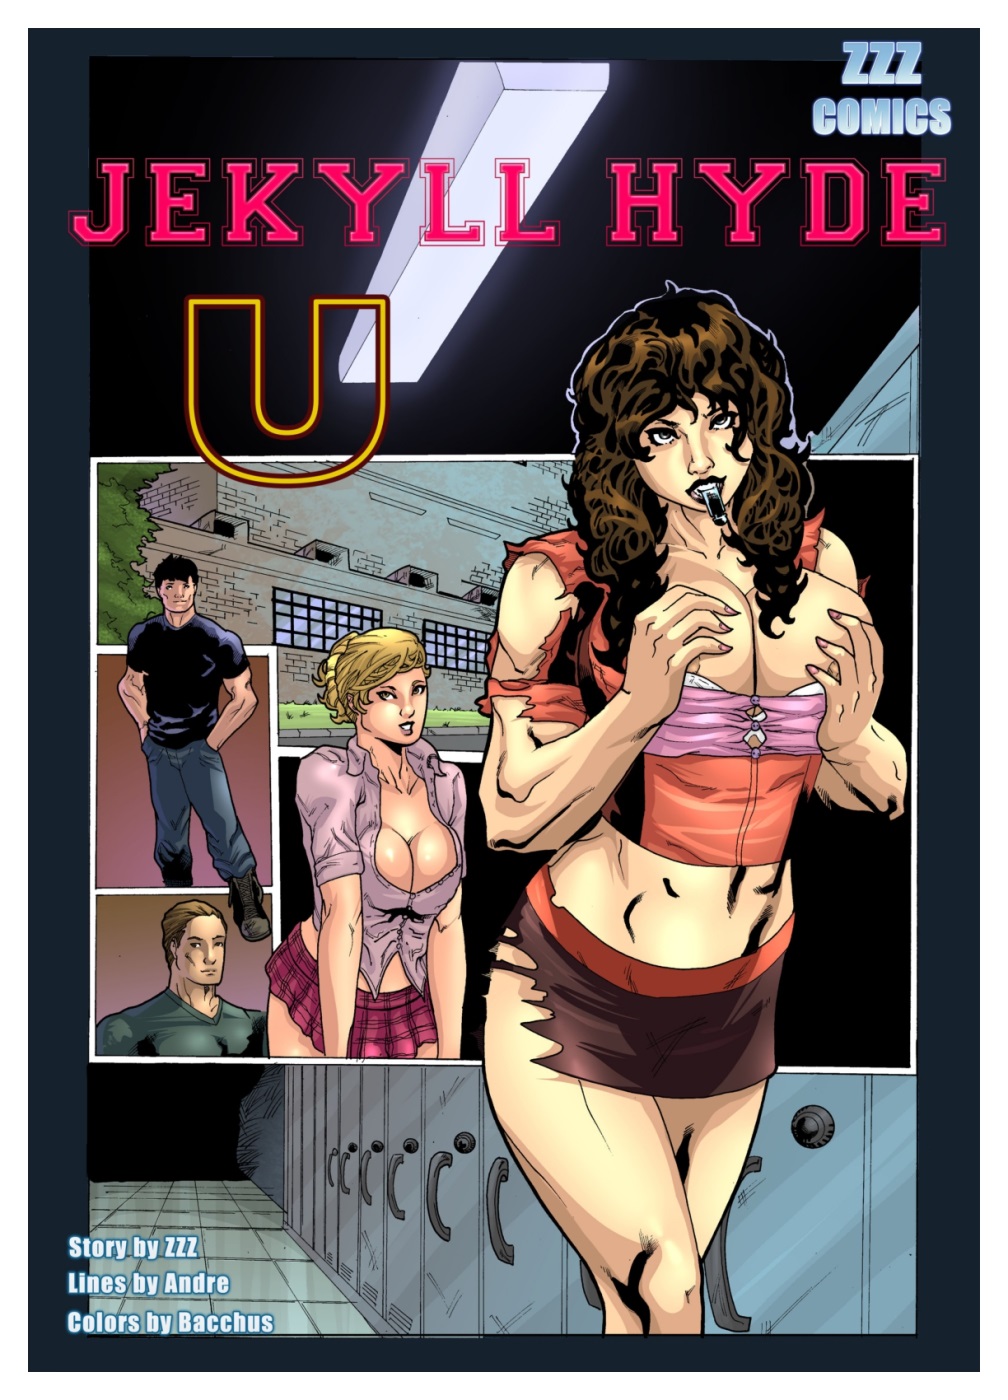 Jekyll and hyde female tg comic porn